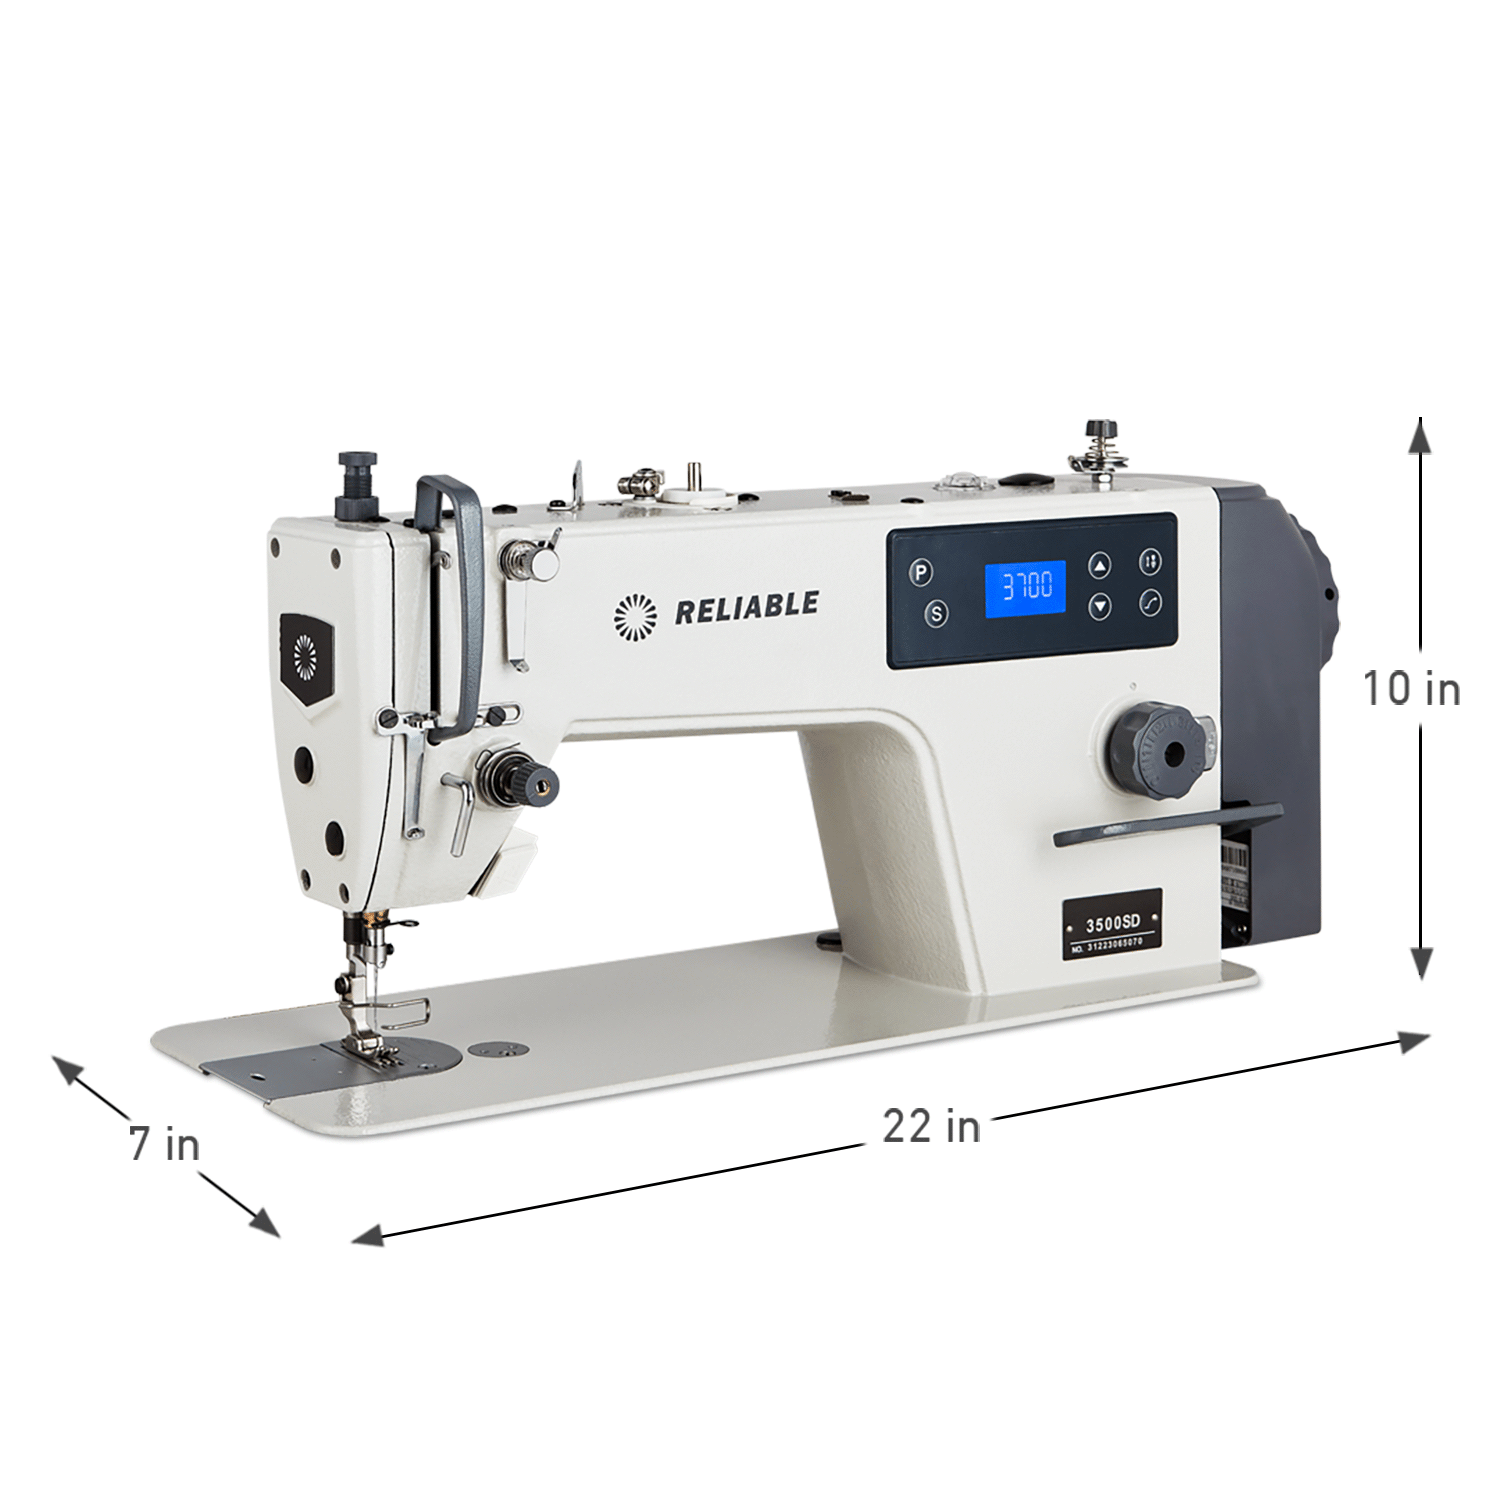 3300SD DIRECT DRIVE SINGLE NEEDLE SEWING MACHINE DIMENSIONS